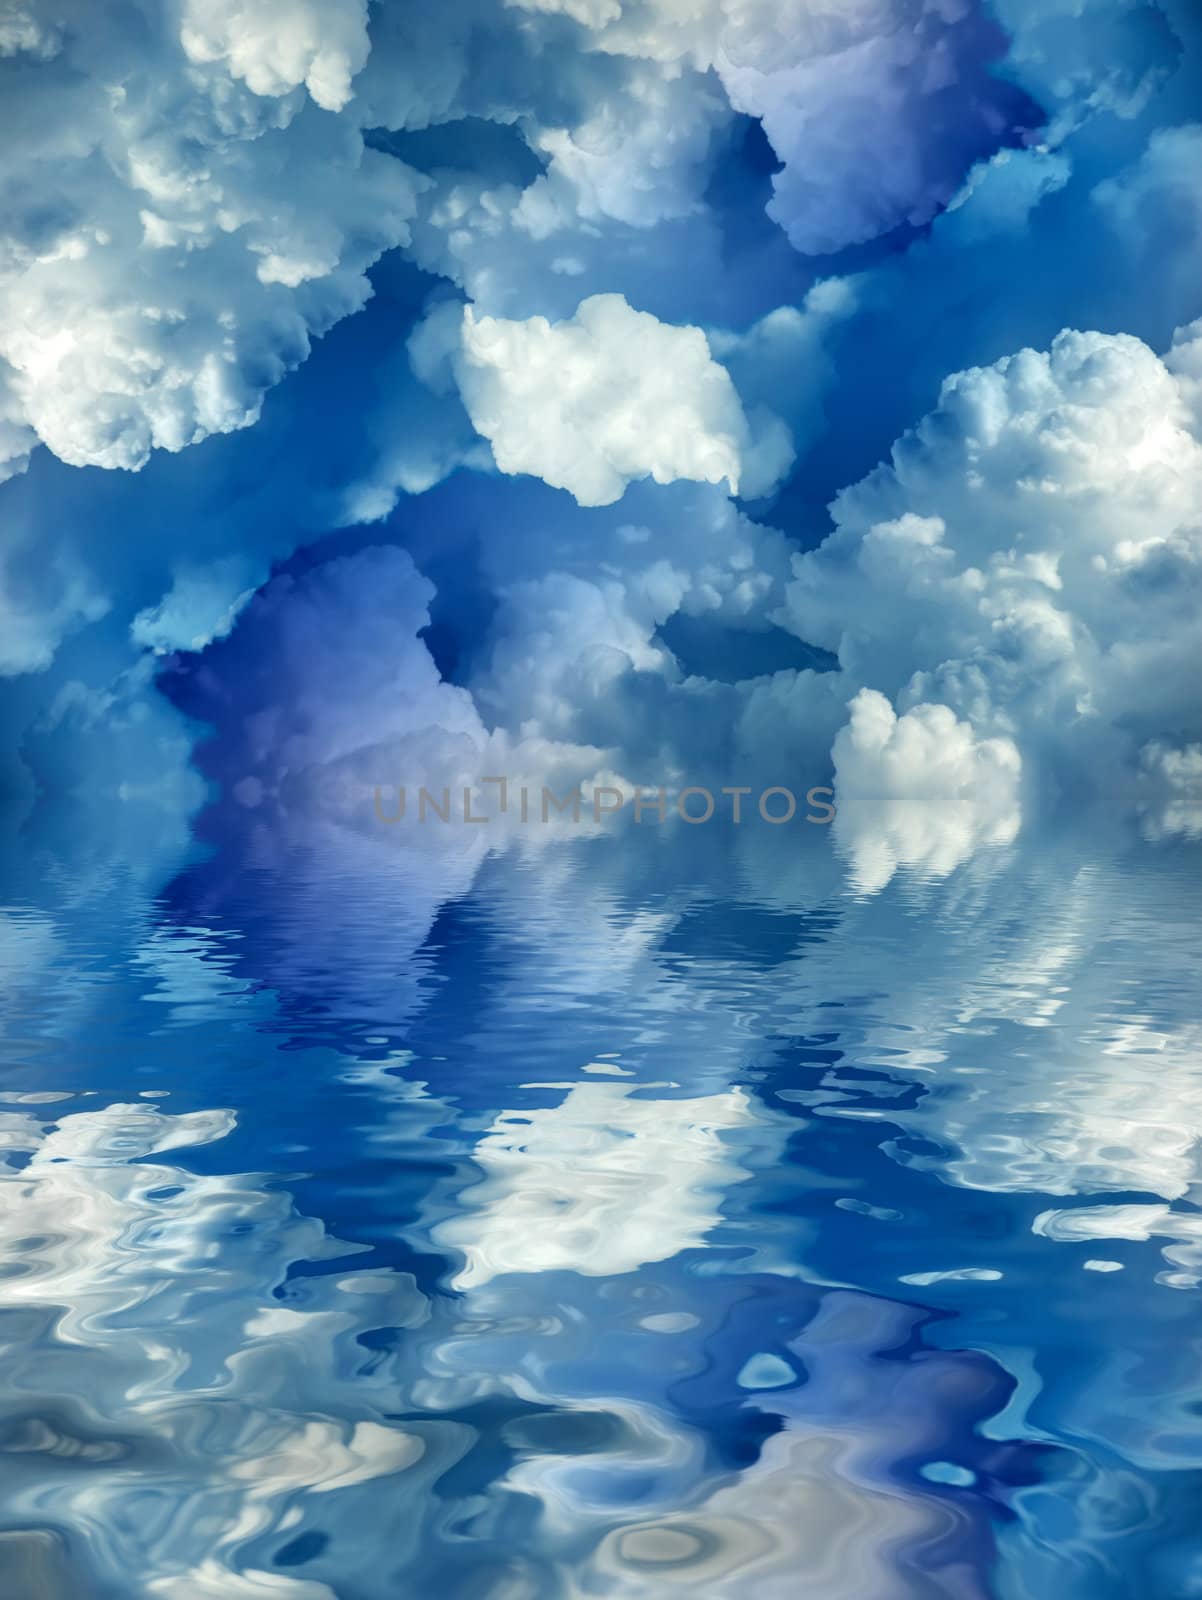 Cloud background image by xfdly5